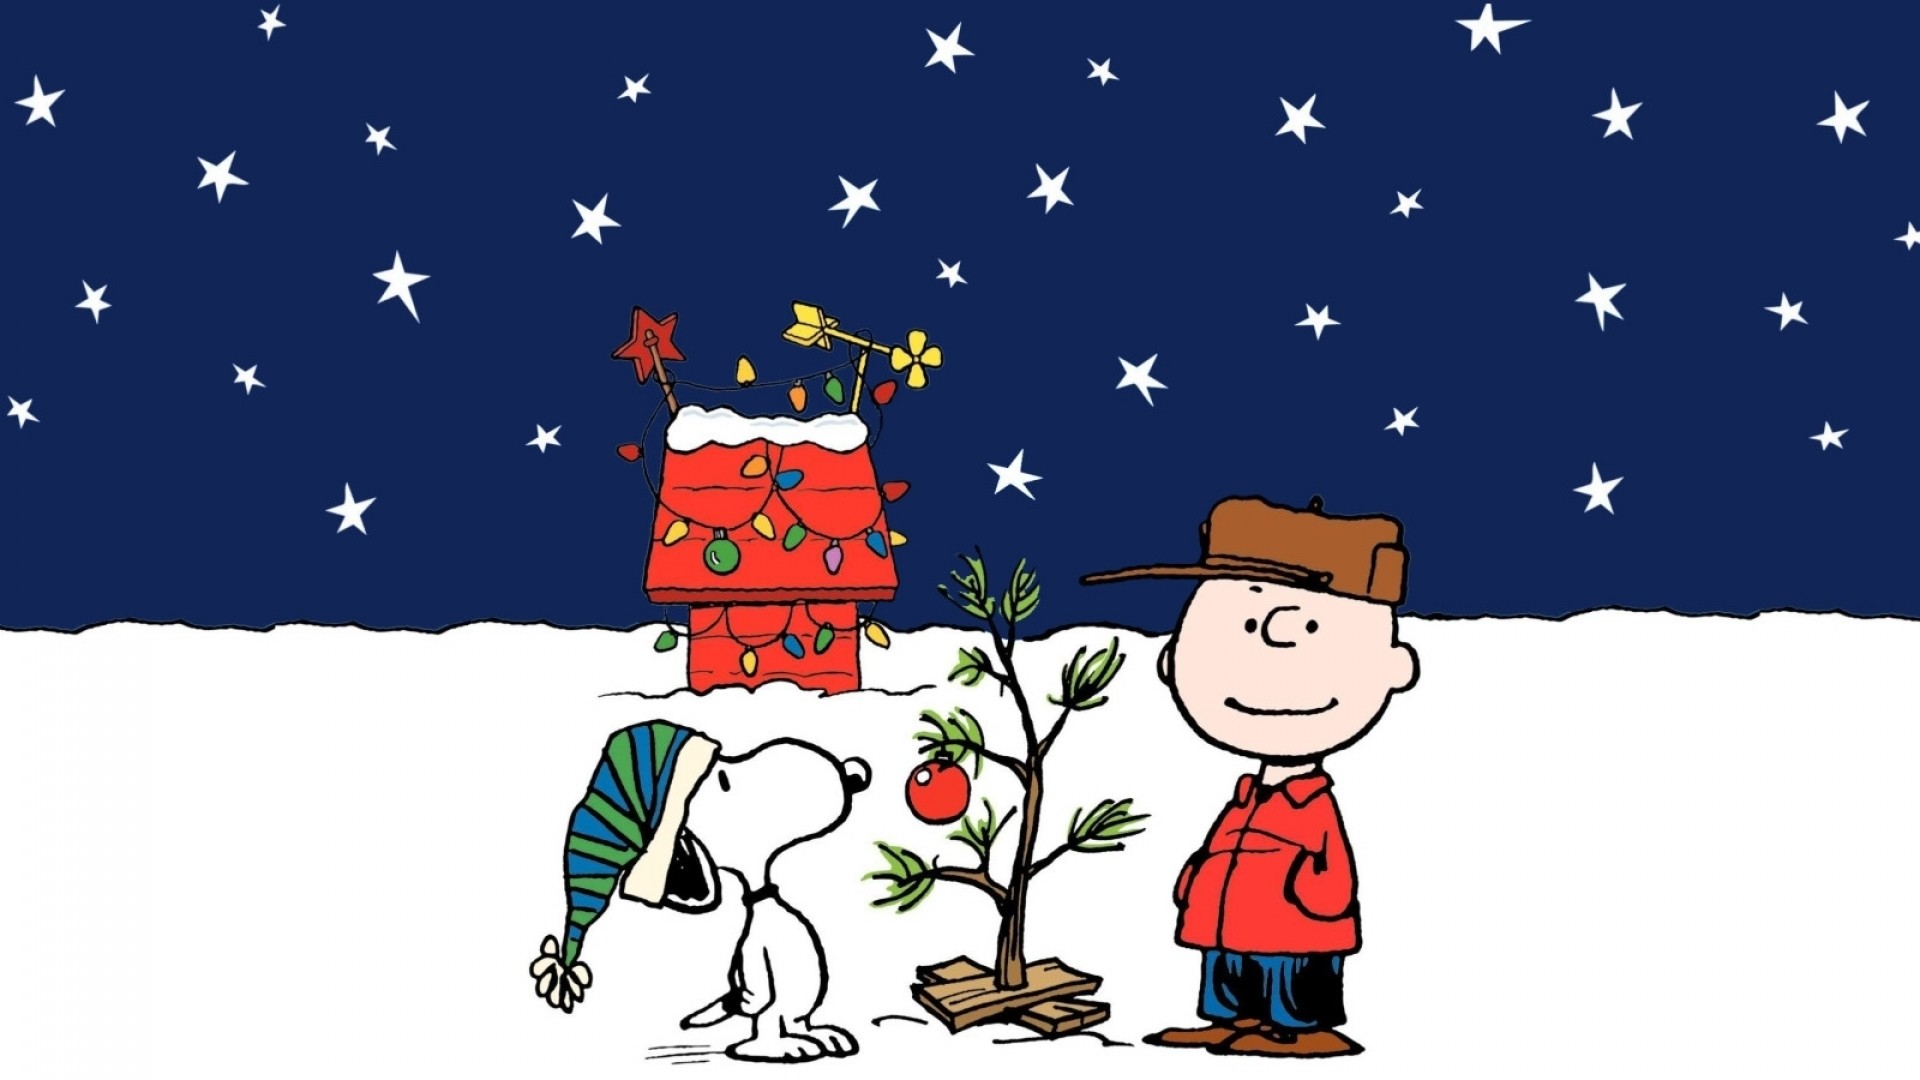 Snoopy Christmas Wallpaper For Puter Image